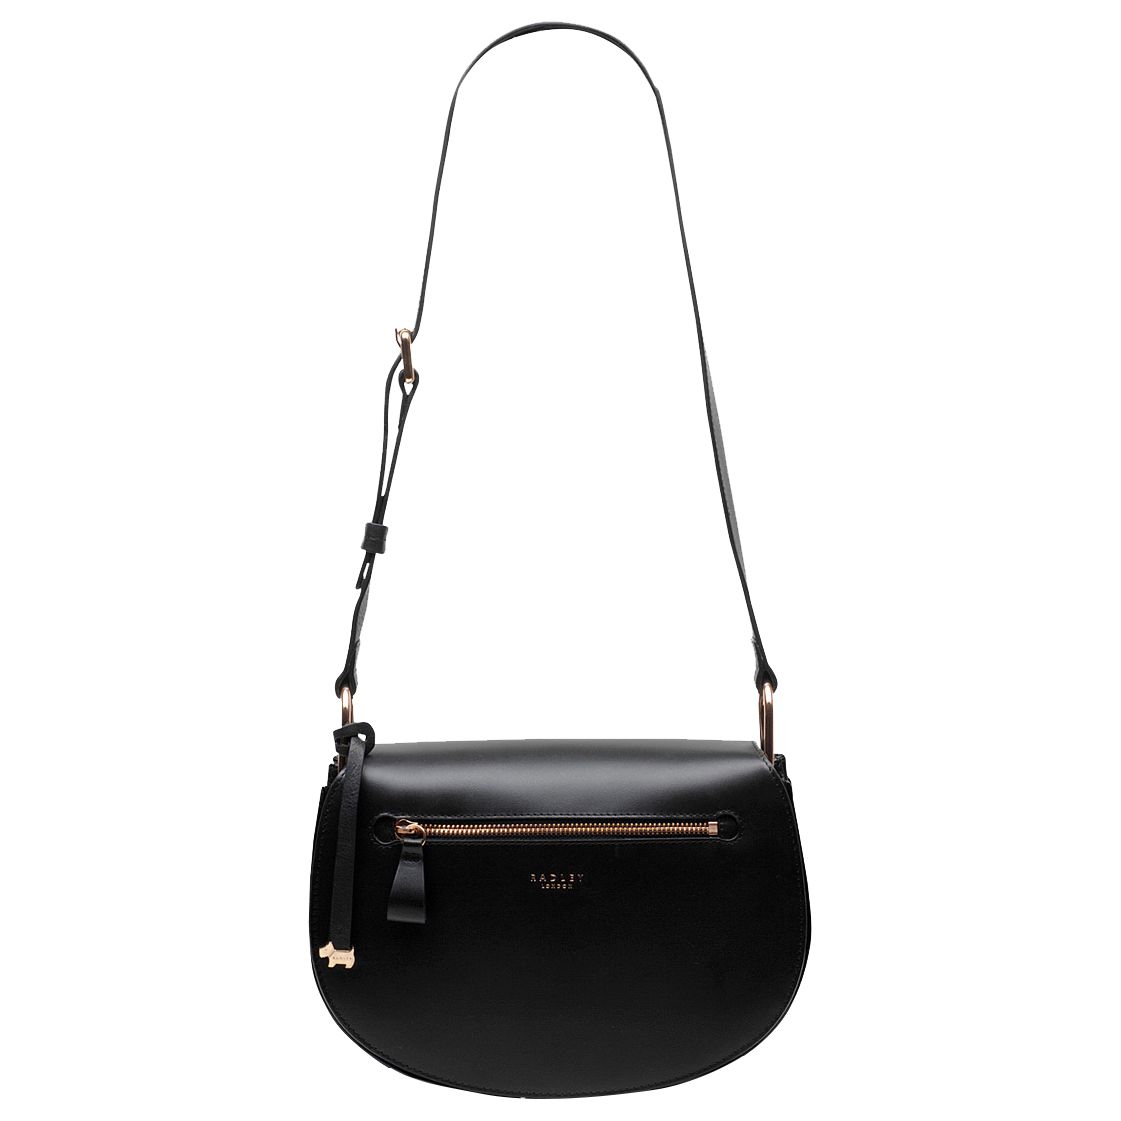 Radley Camley Street Leather Large Flapover Cross Body Bag at John Lewis & Partners